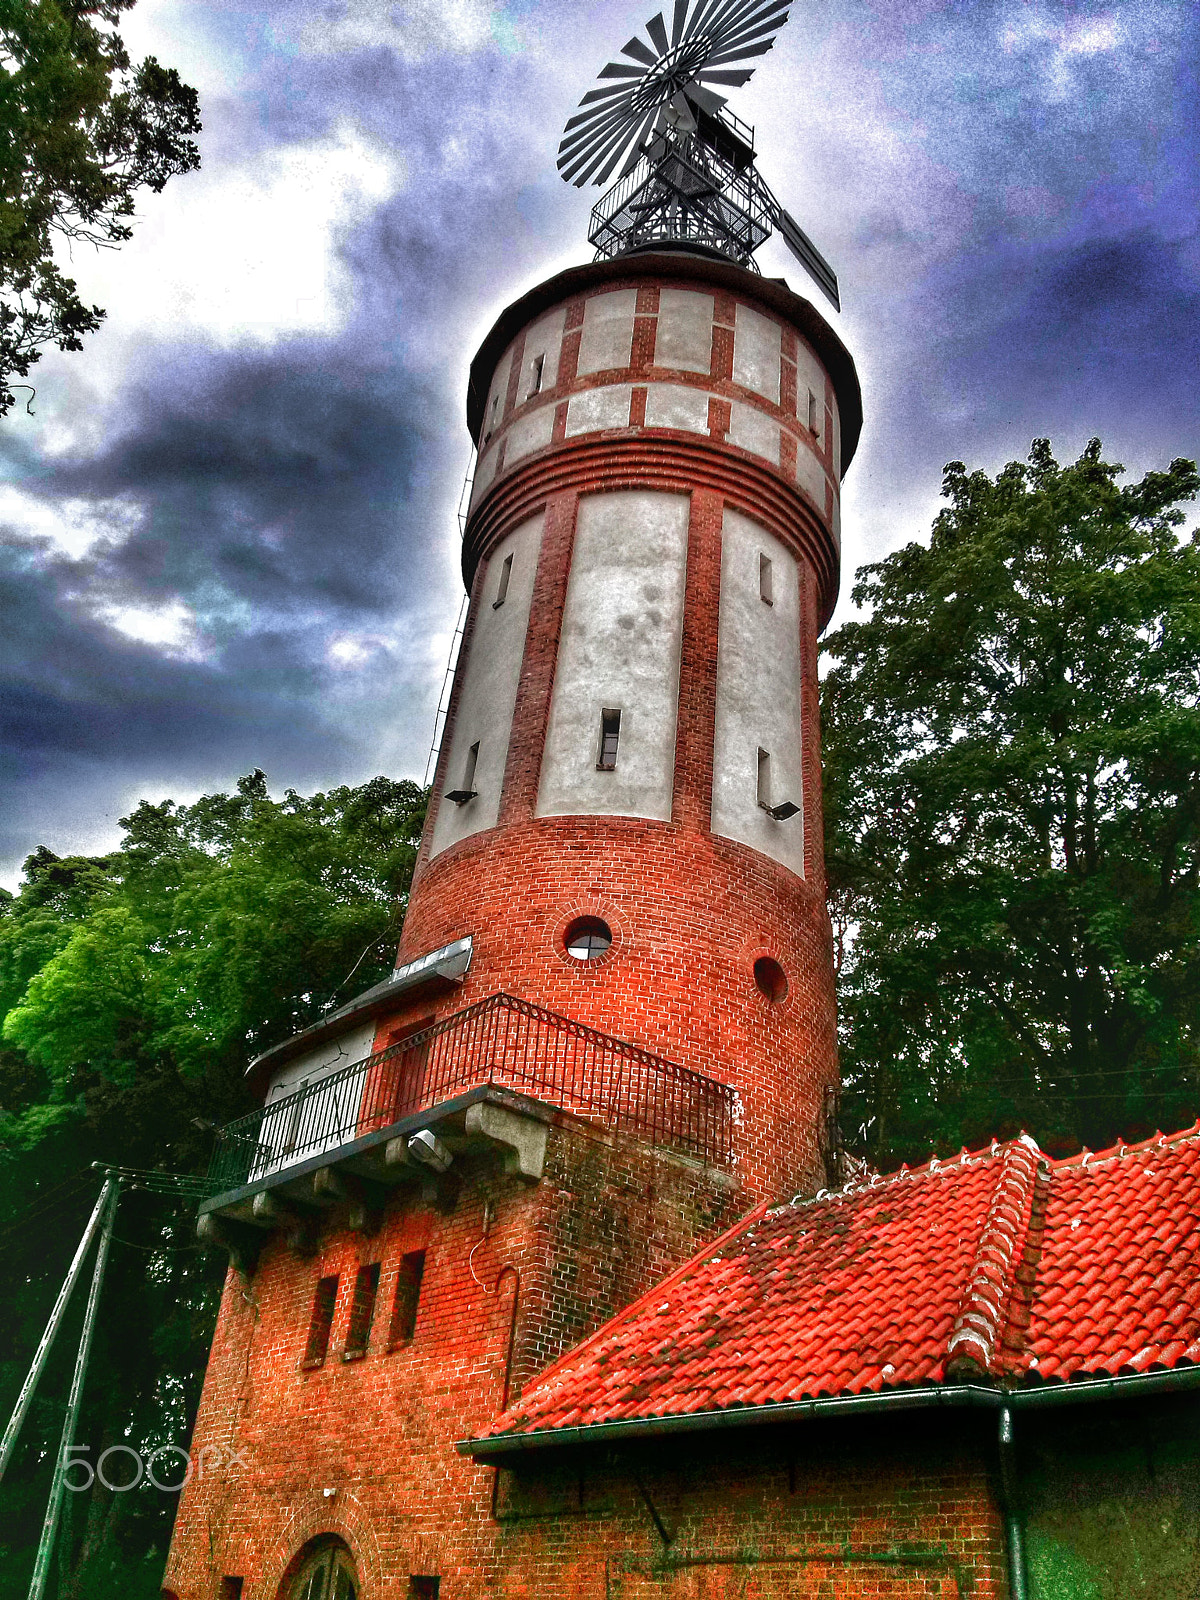 LG OPTIMUS L7 II sample photo. Original water tower with fan photography